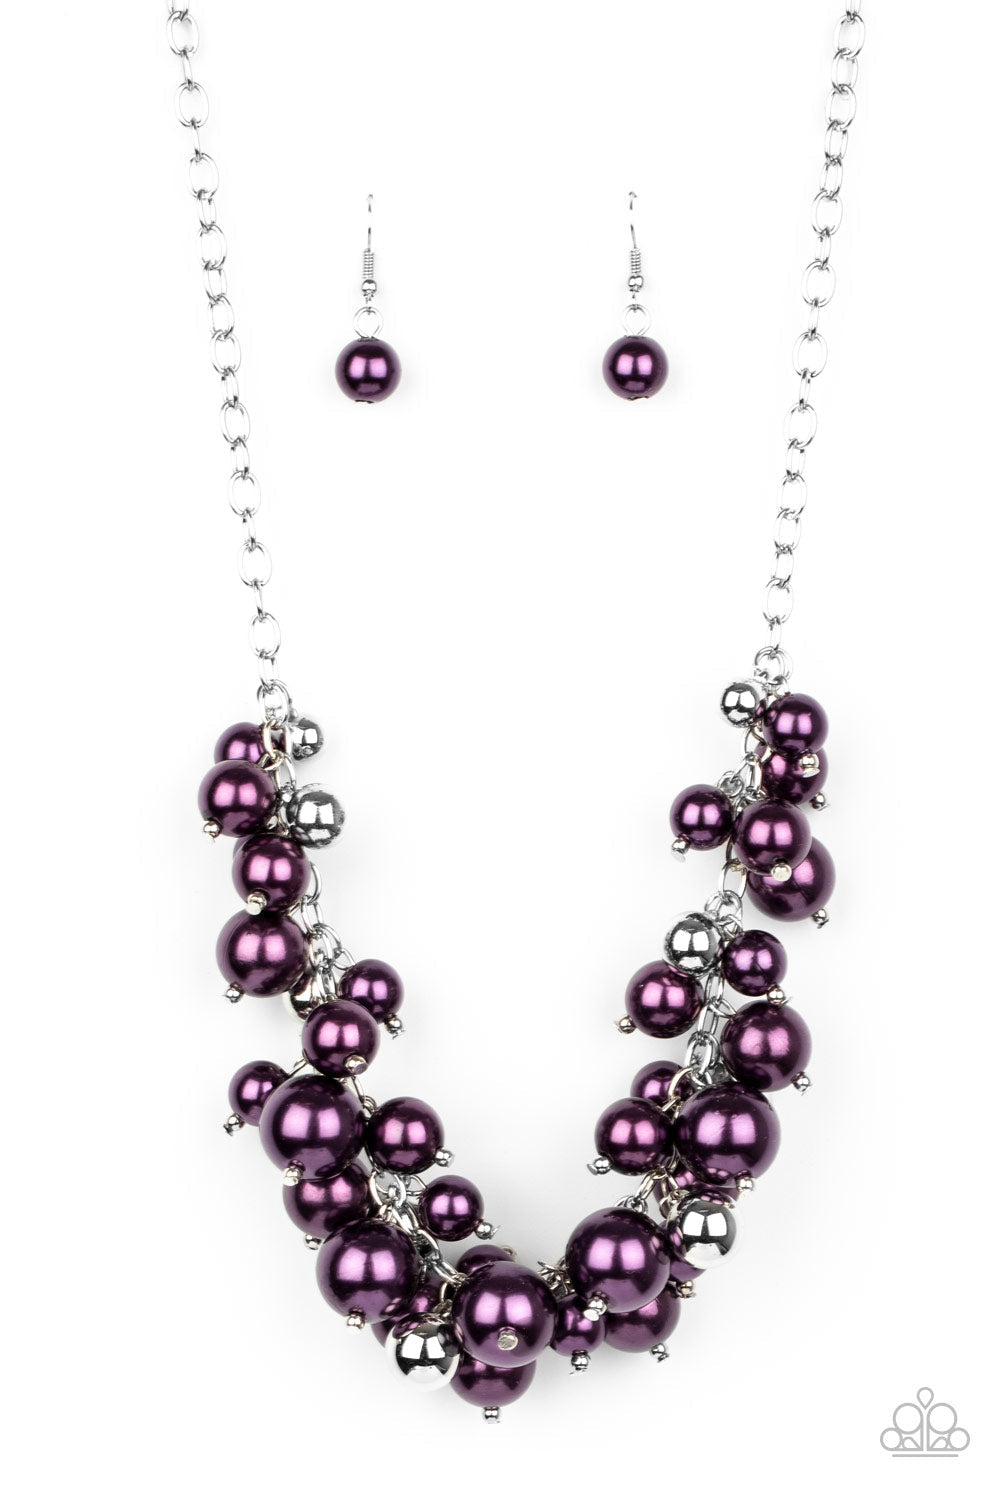 Uptown Upgrade - Purple and Silver Fashion Necklace - Paparazzi Accessories - A bubbly collection of shiny silver and pearly purple beads cluster along a shimmery silver chain below the collar, creating a vivacious fringe. Features an adjustable clasp closure. Sold as one individual necklace.